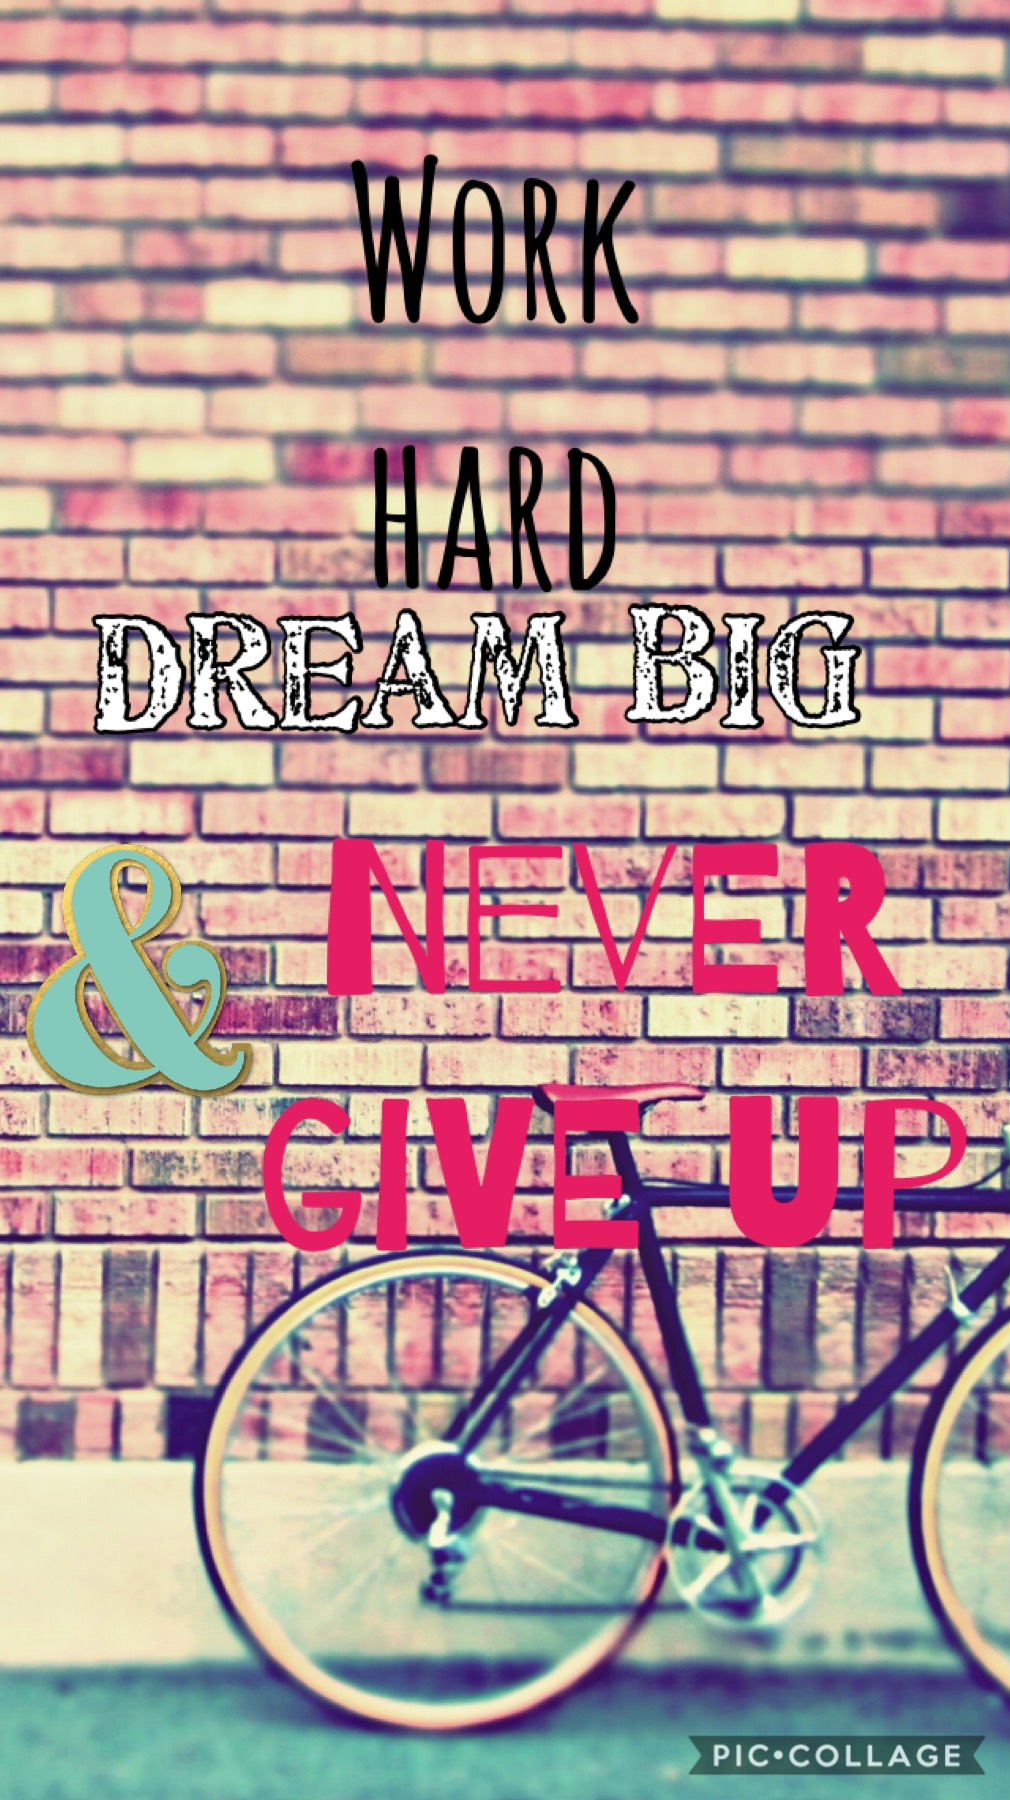 Don’t give up your dreams😘